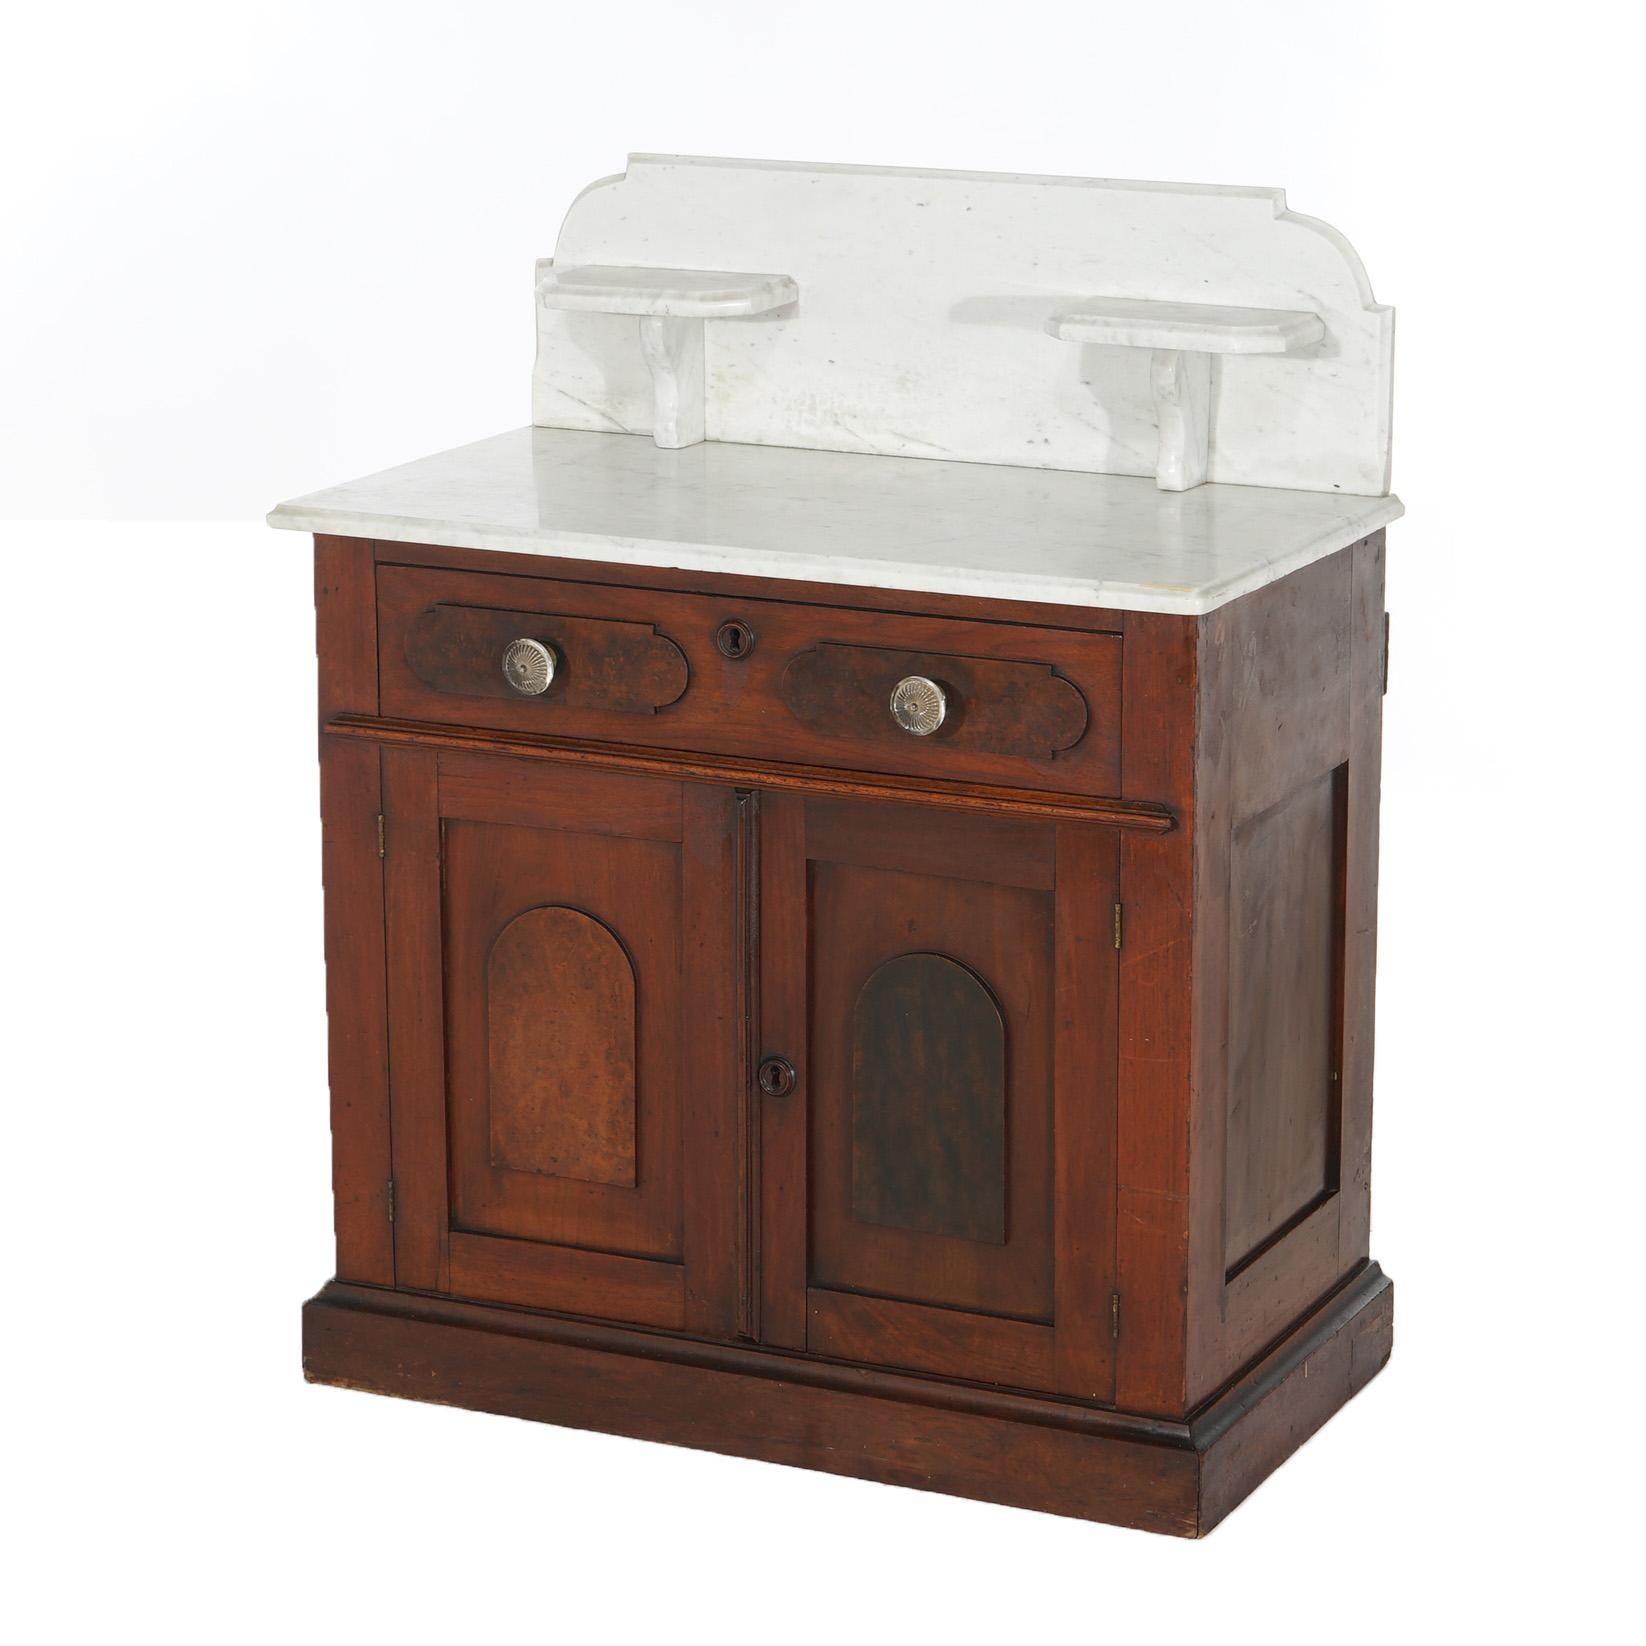 ***Ask About Reduced In-House Delivery Rates - Reliable Professional Service & Fully Insured***
Antique Victorian Walnut and Burl Marble Top Wash Stand with Candle Stands, Single Long Drawer and Double Door Lower Cabinet with Recessed Panels